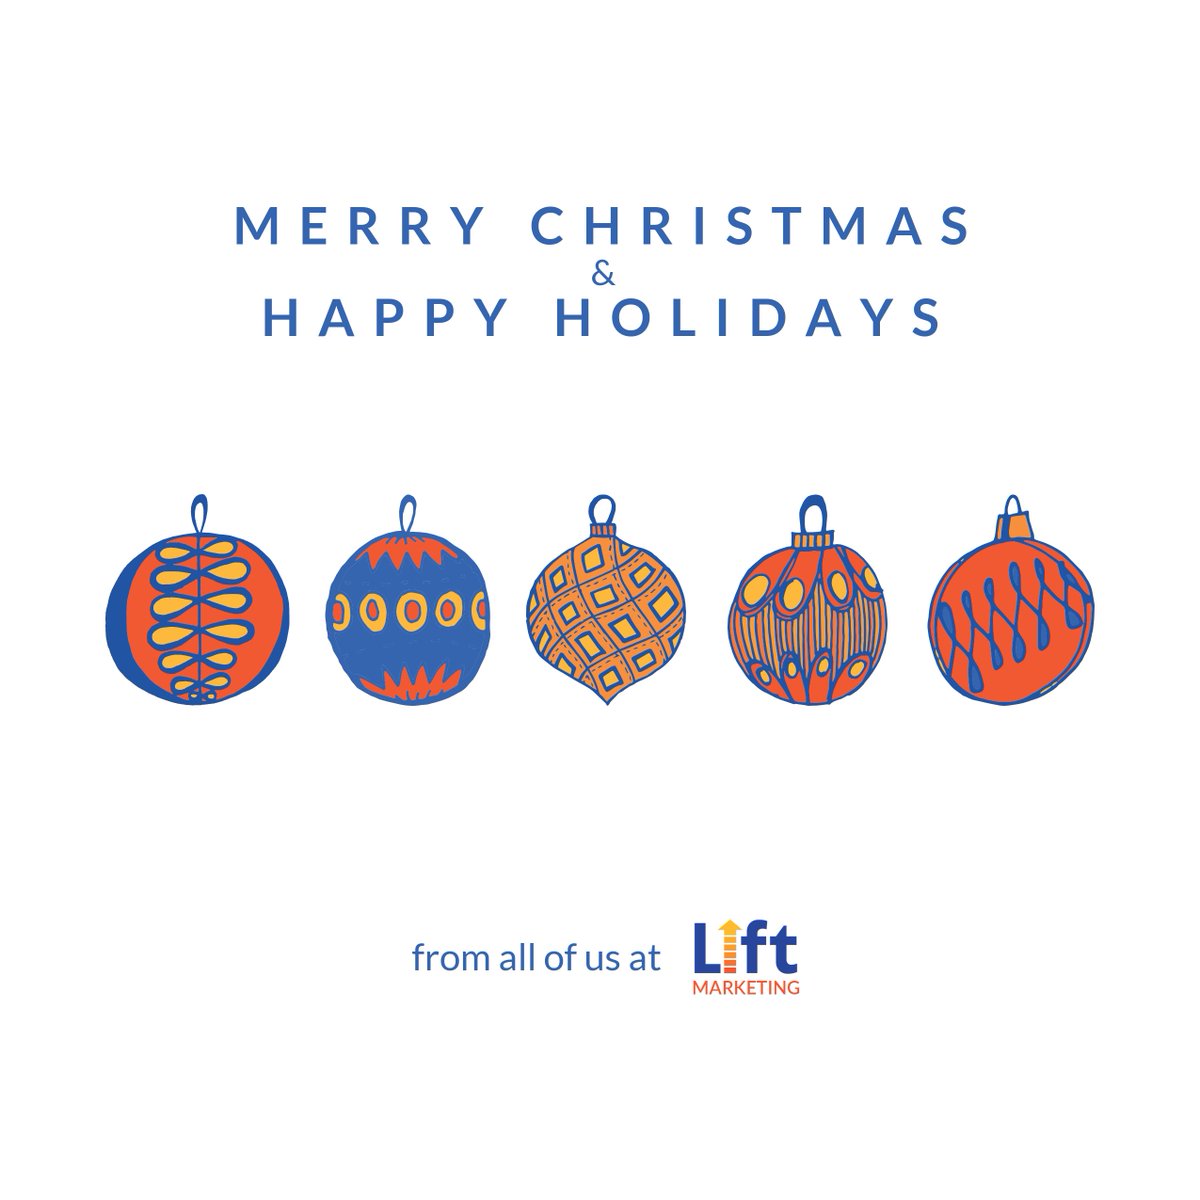 From all of us at Lift Marketing, we hope you and yours have a great holiday and a very Merry Christmas!

We'll see you in 2024!

#GetLifted